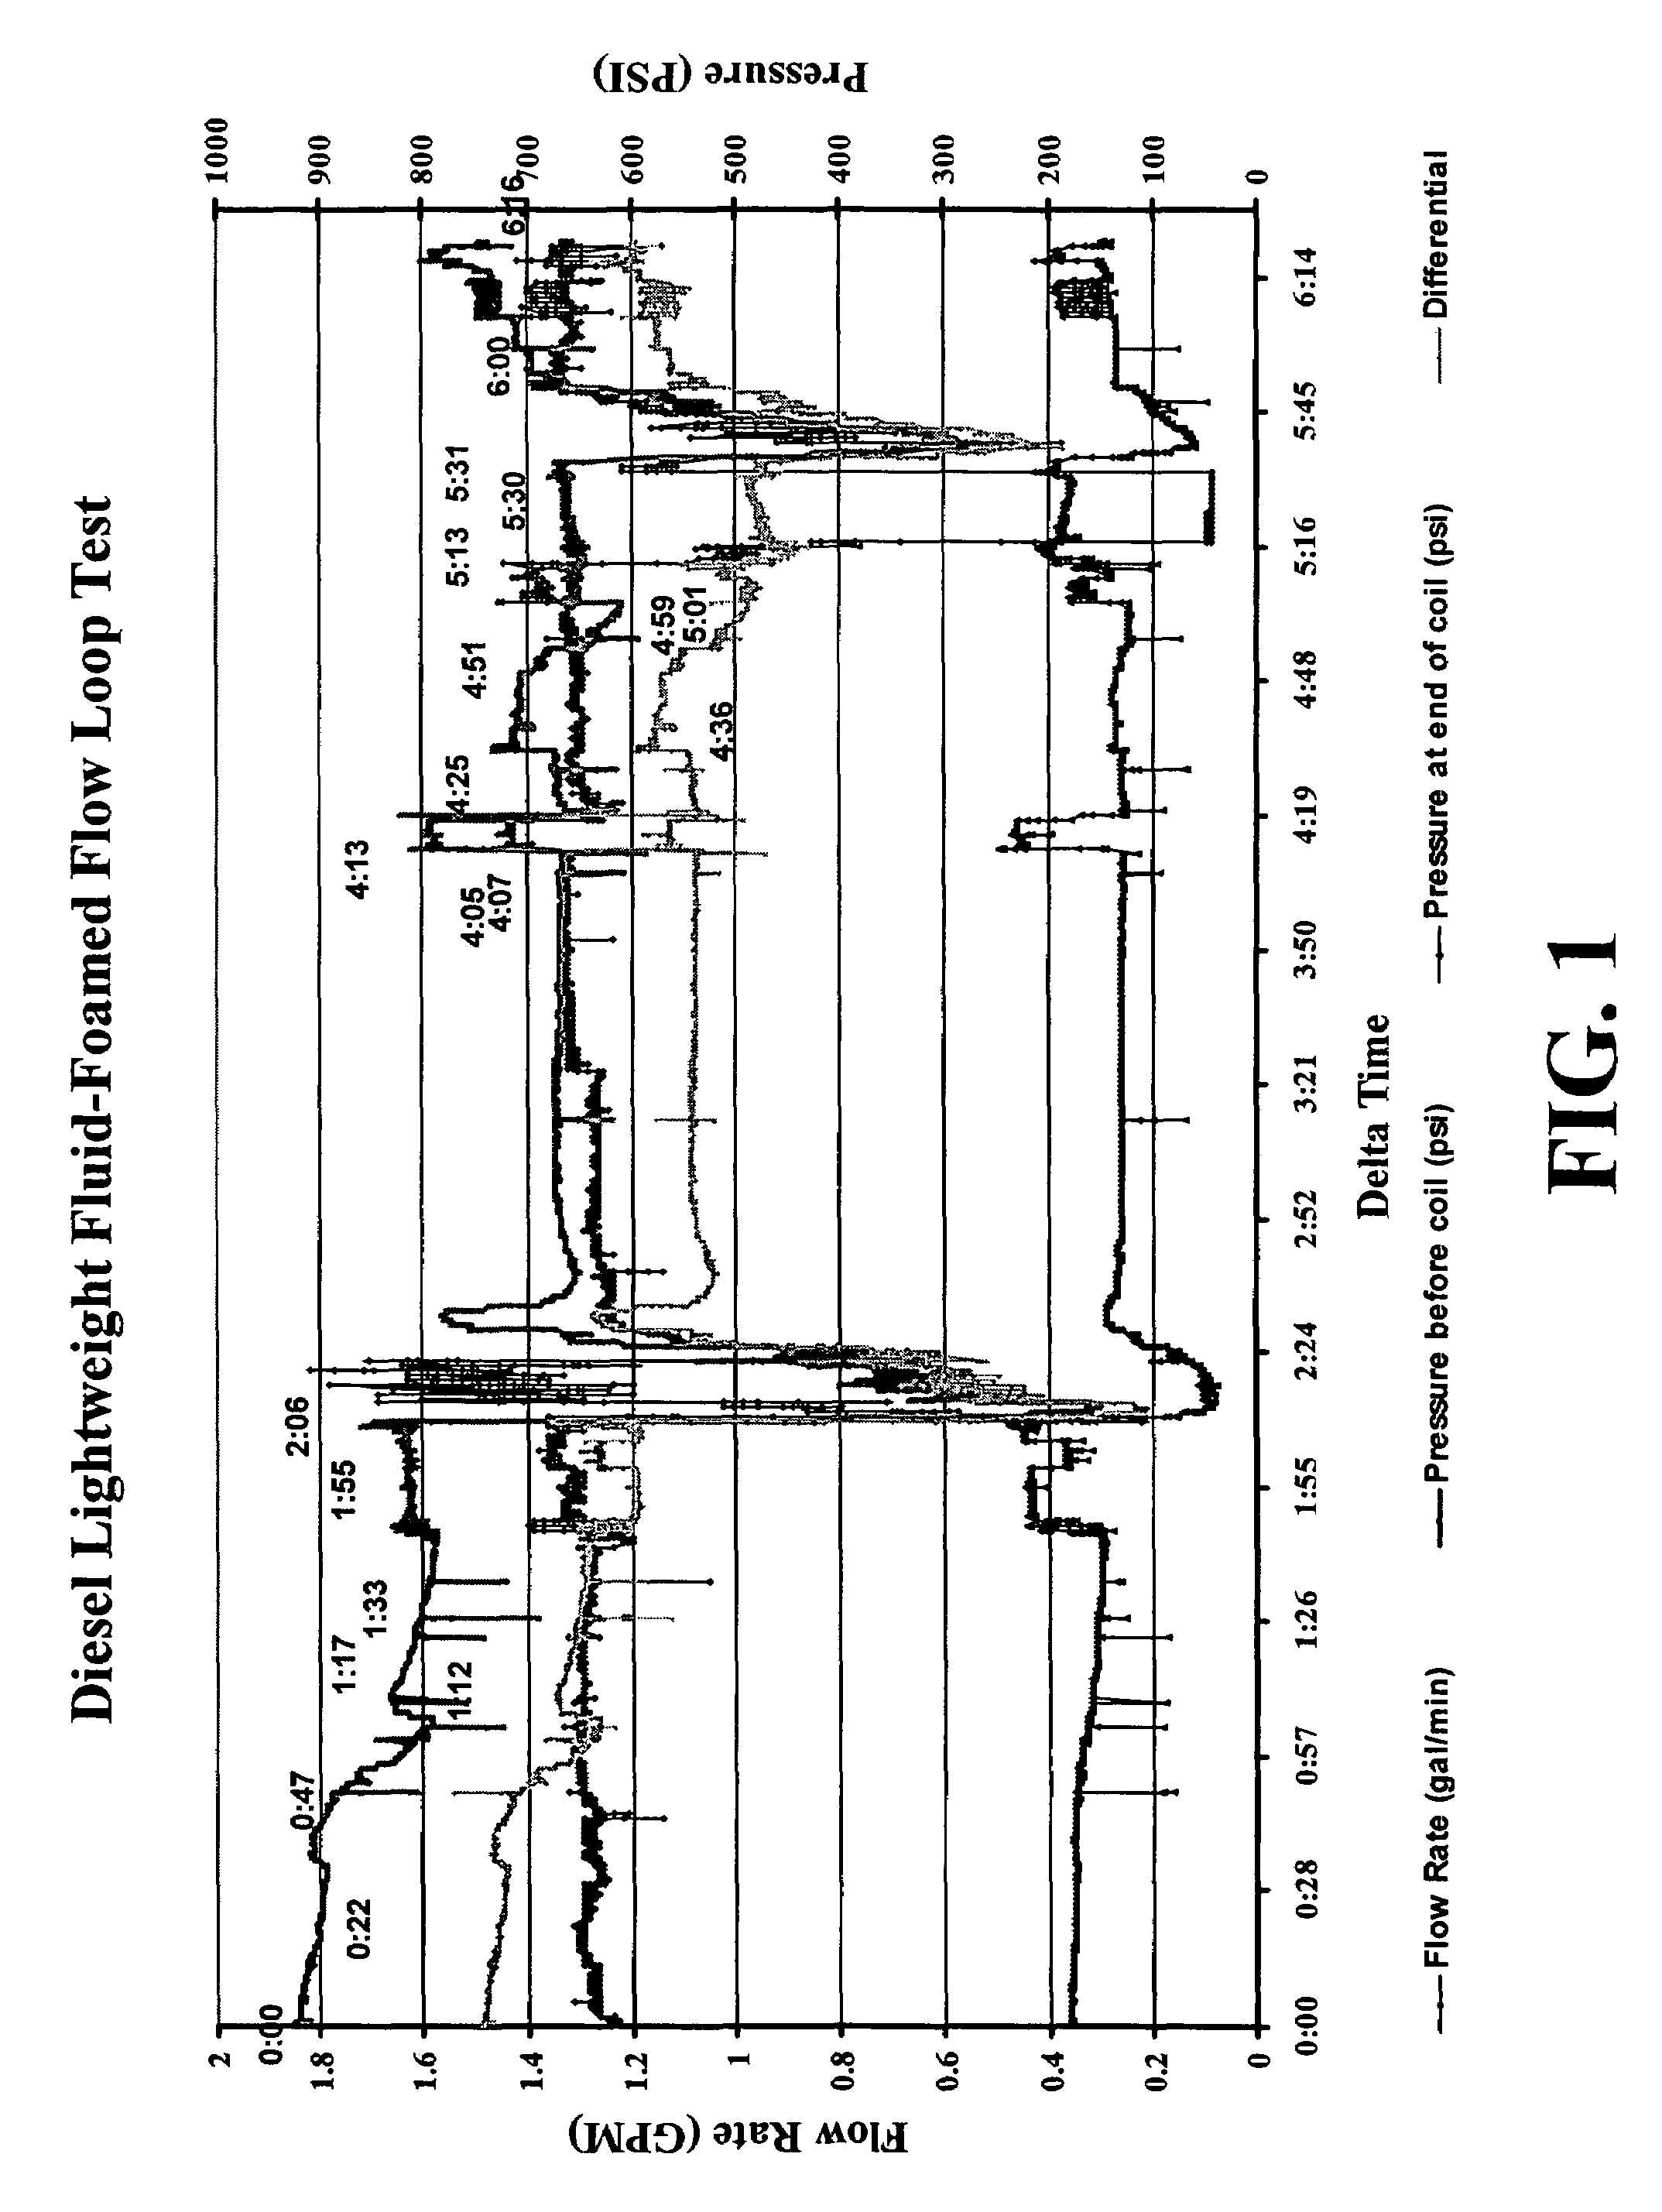 Non-aqueous foam composition for gas lift injection and methods for making and using same